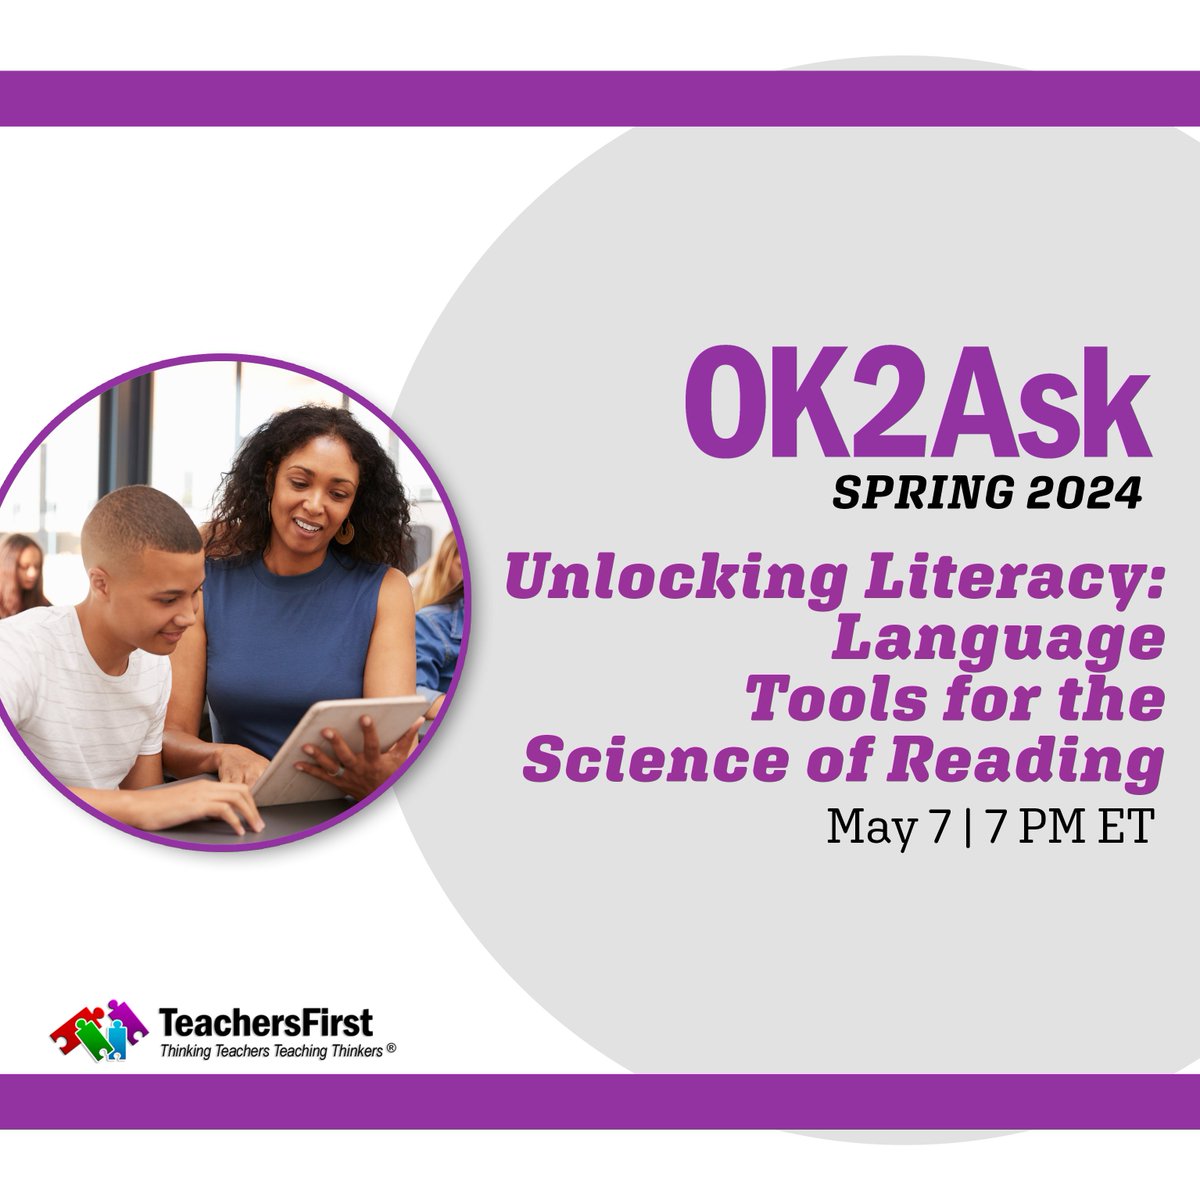 Join us on May 7 to explore innovative ways to enhance oral language development in your classroom through the strategic integration of technology at a free online workshop. Register now: bit.ly/3vy9go5 #ScienceOfReading #SOR